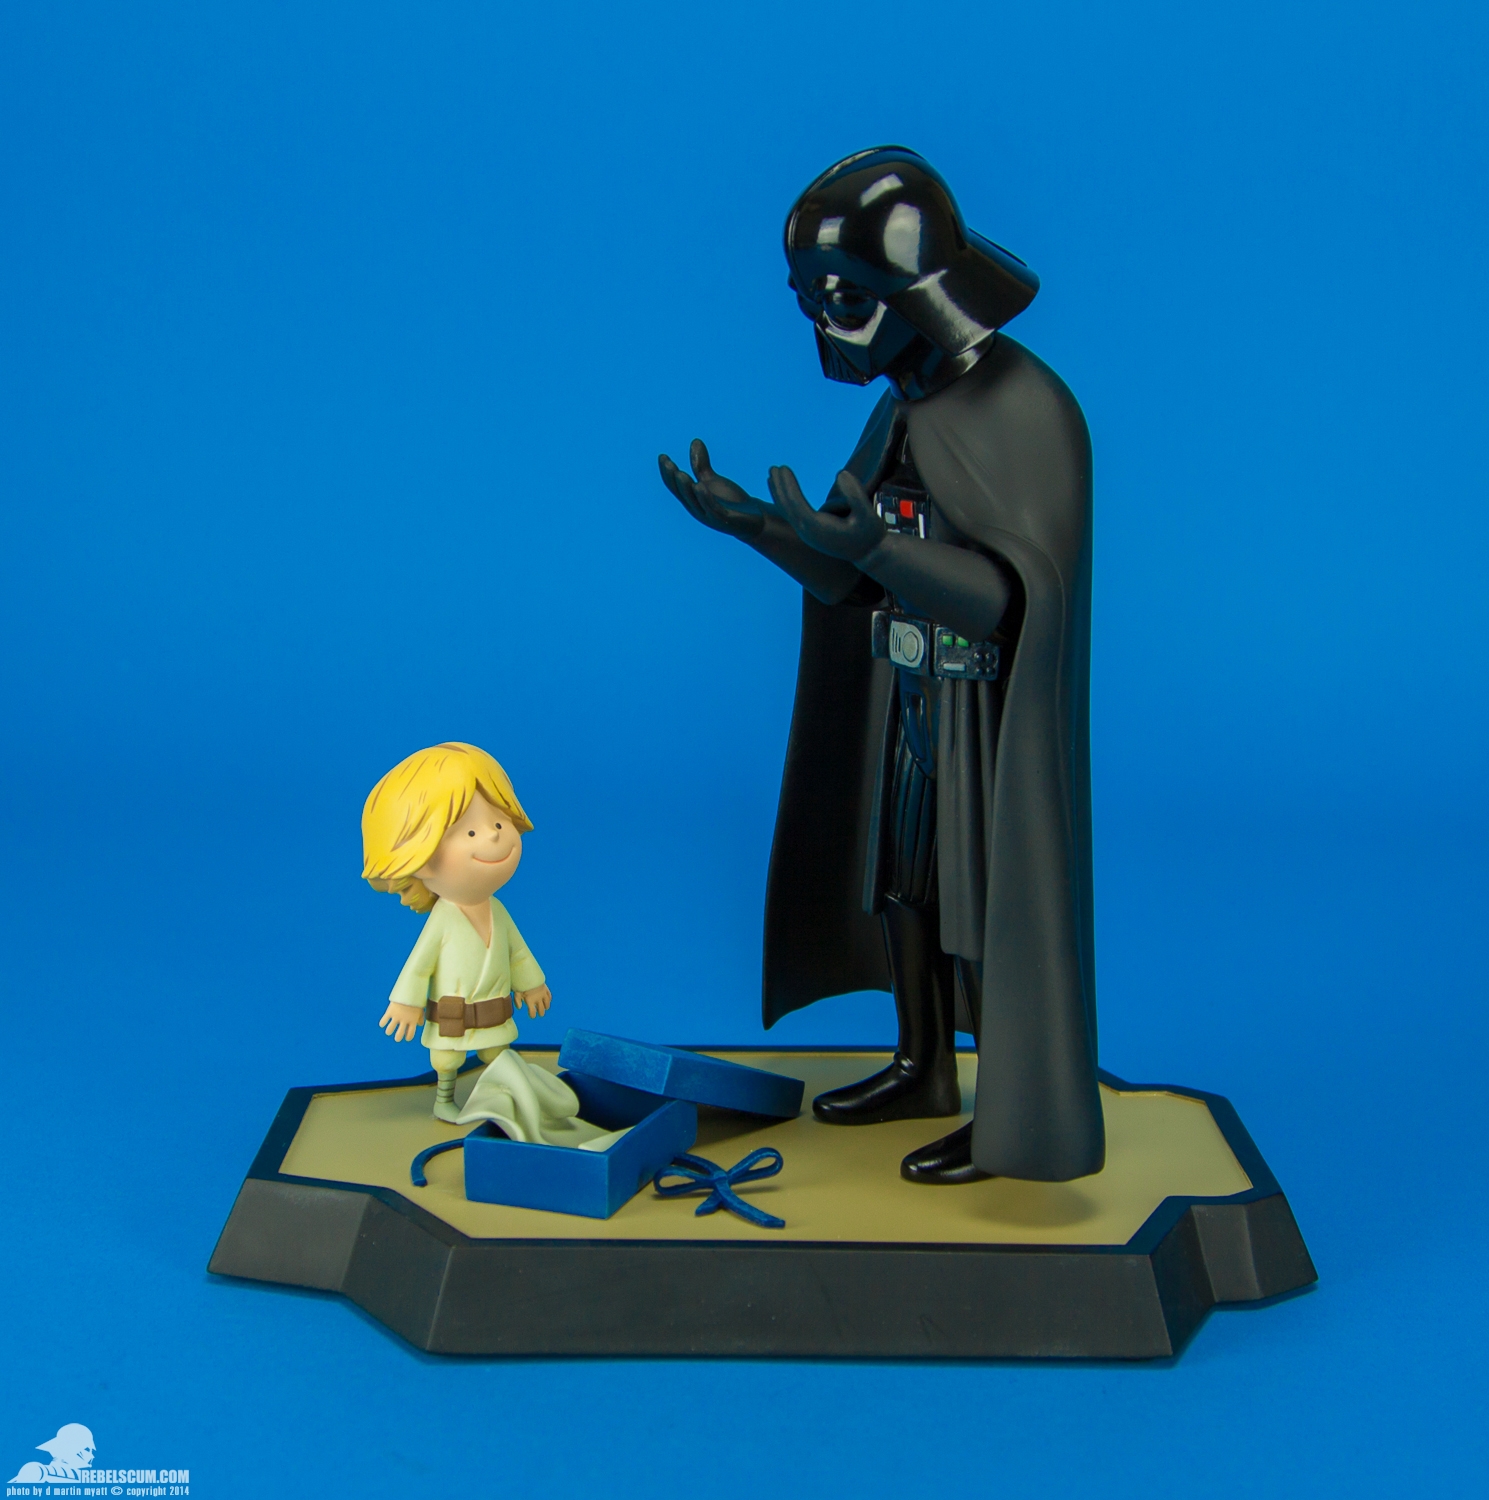 Darth-Vader-And-Son-Deluxe-Maquette-Gentle-Giant-Ltd-018.jpg